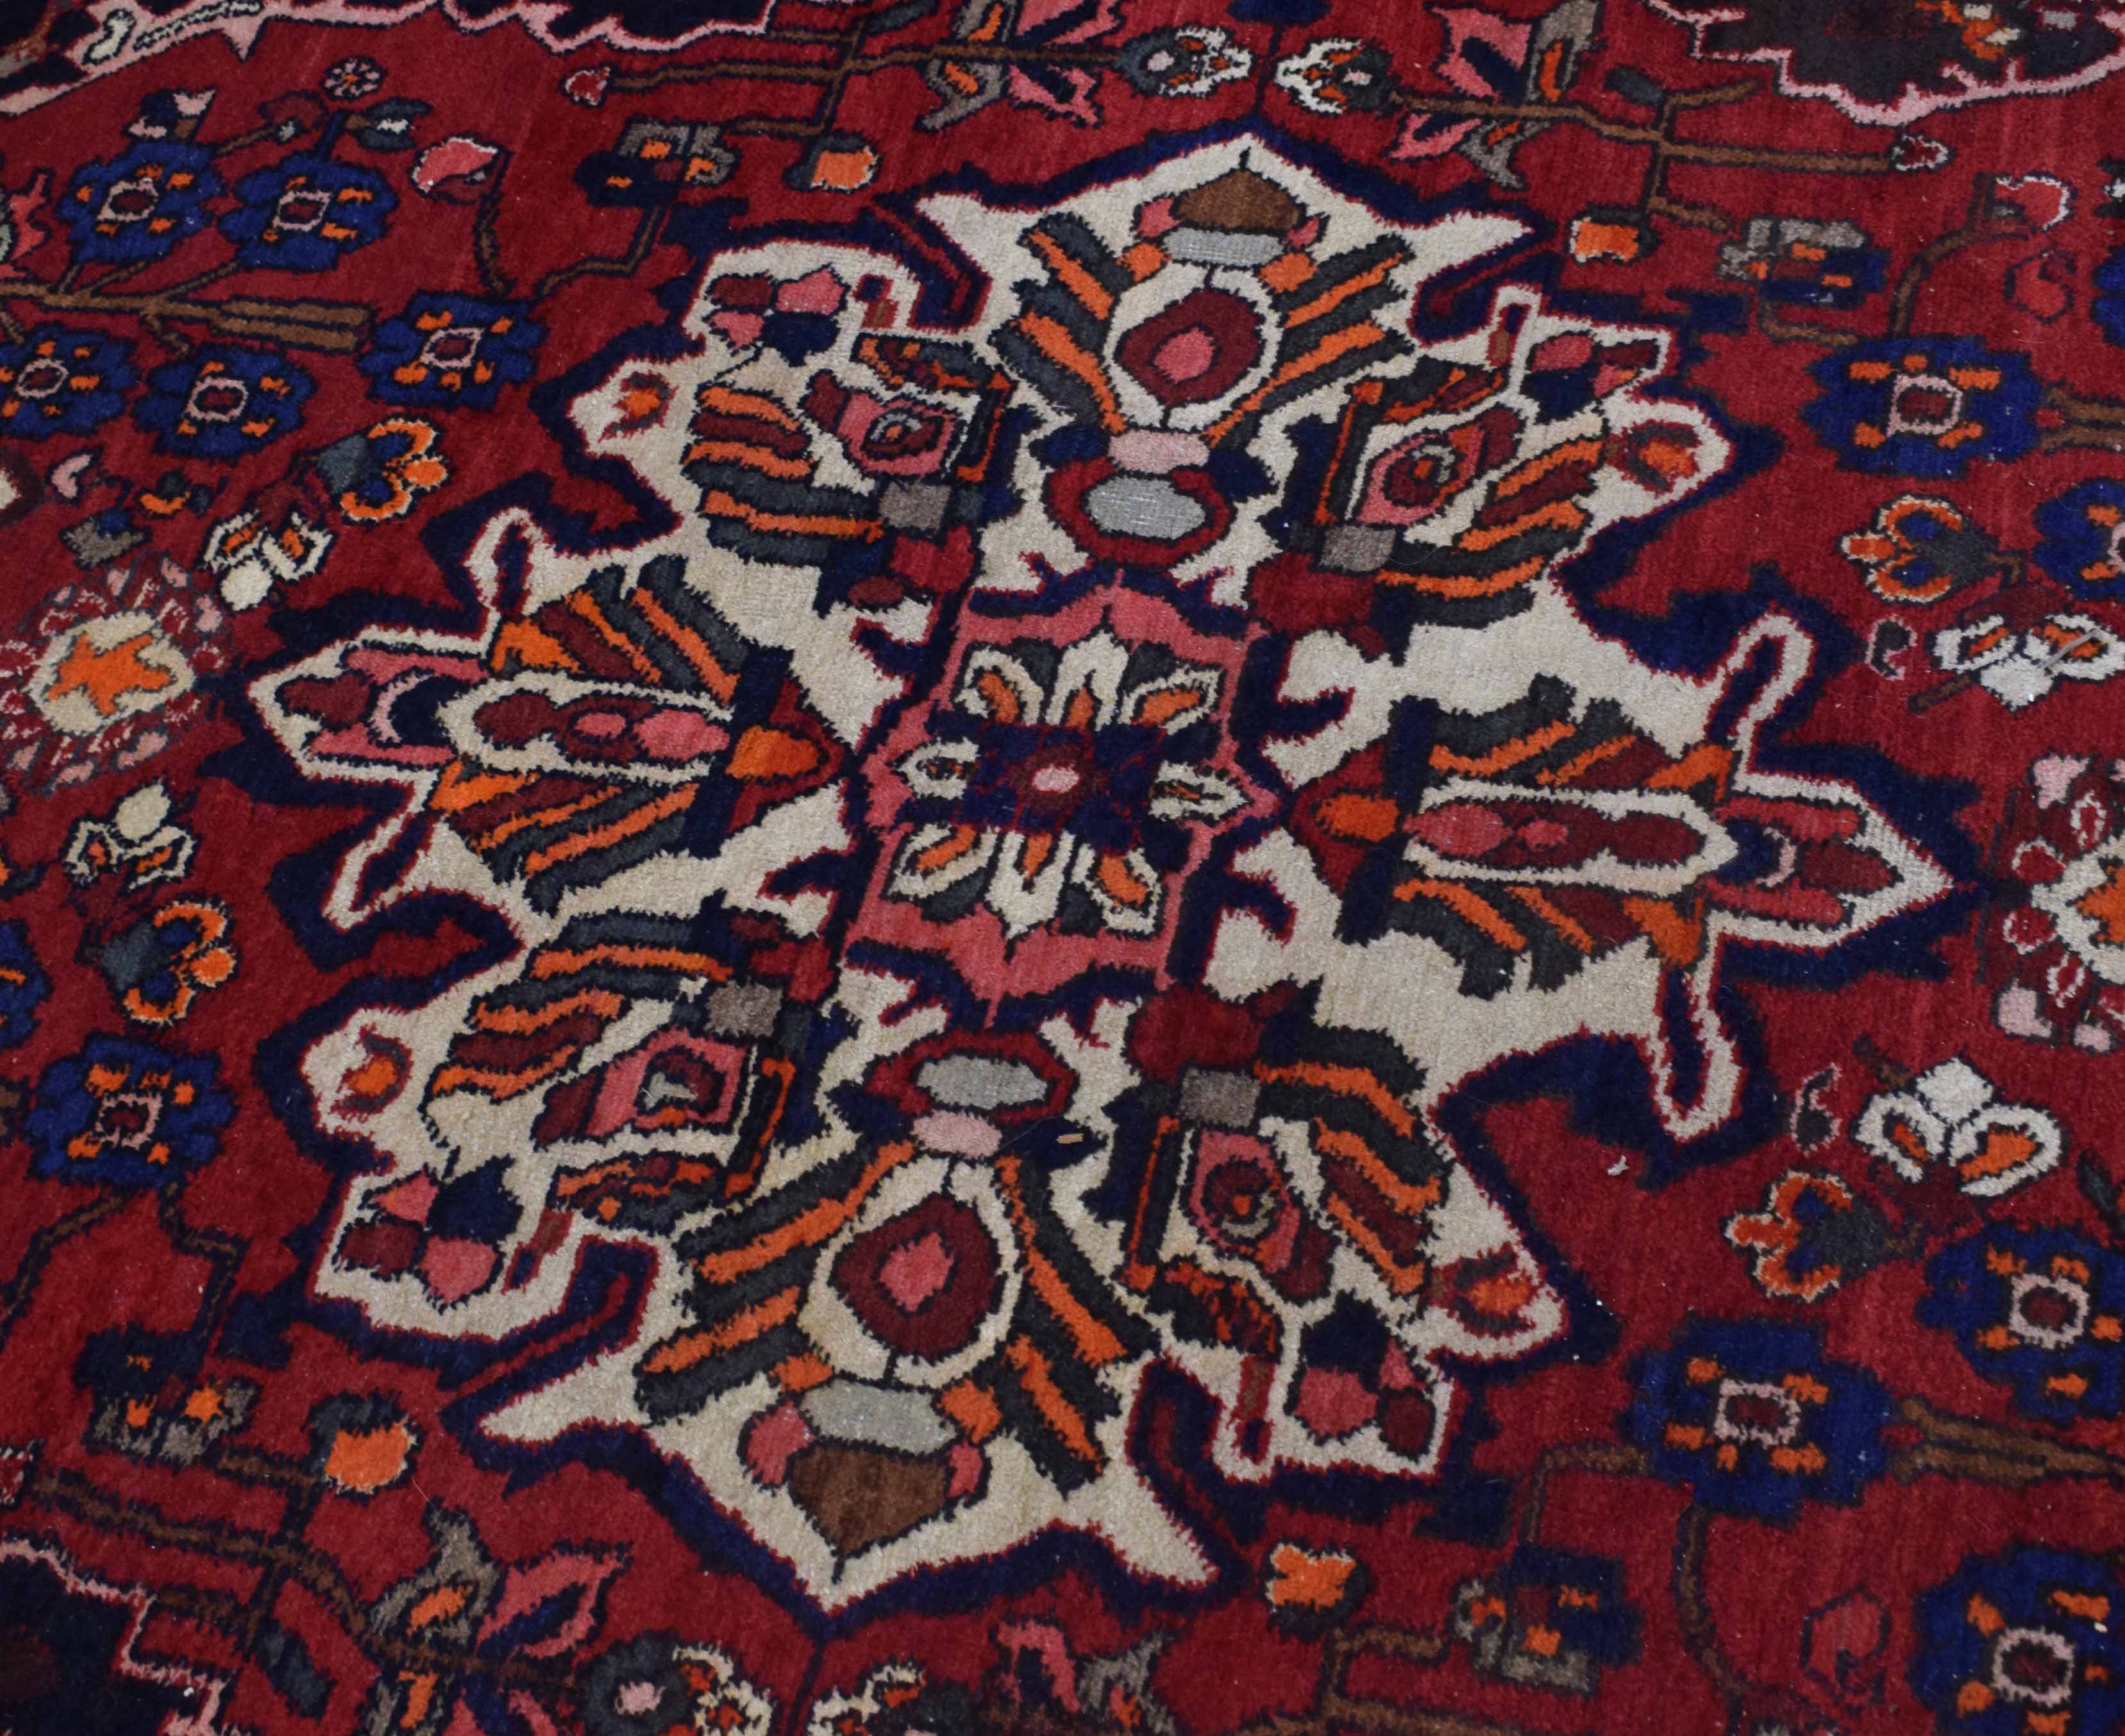 Good quality modern carpet with multi-coloured decoration among red field with a floral design and - Image 3 of 4